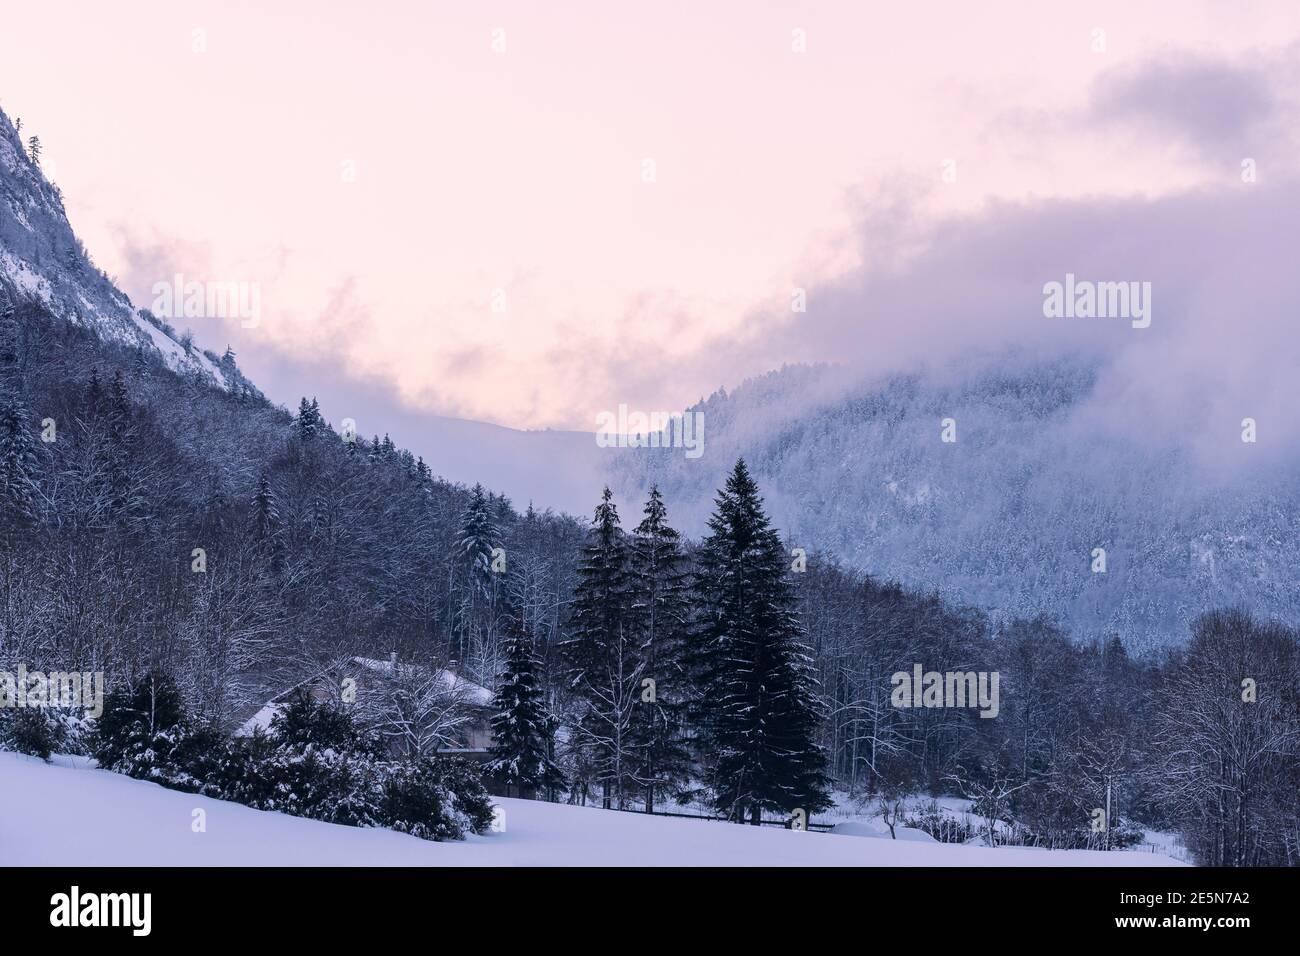 French winter landscapes. Panoramic view of mountain peaks and canyons. Vercors Regional Natural Park. Stock Photo